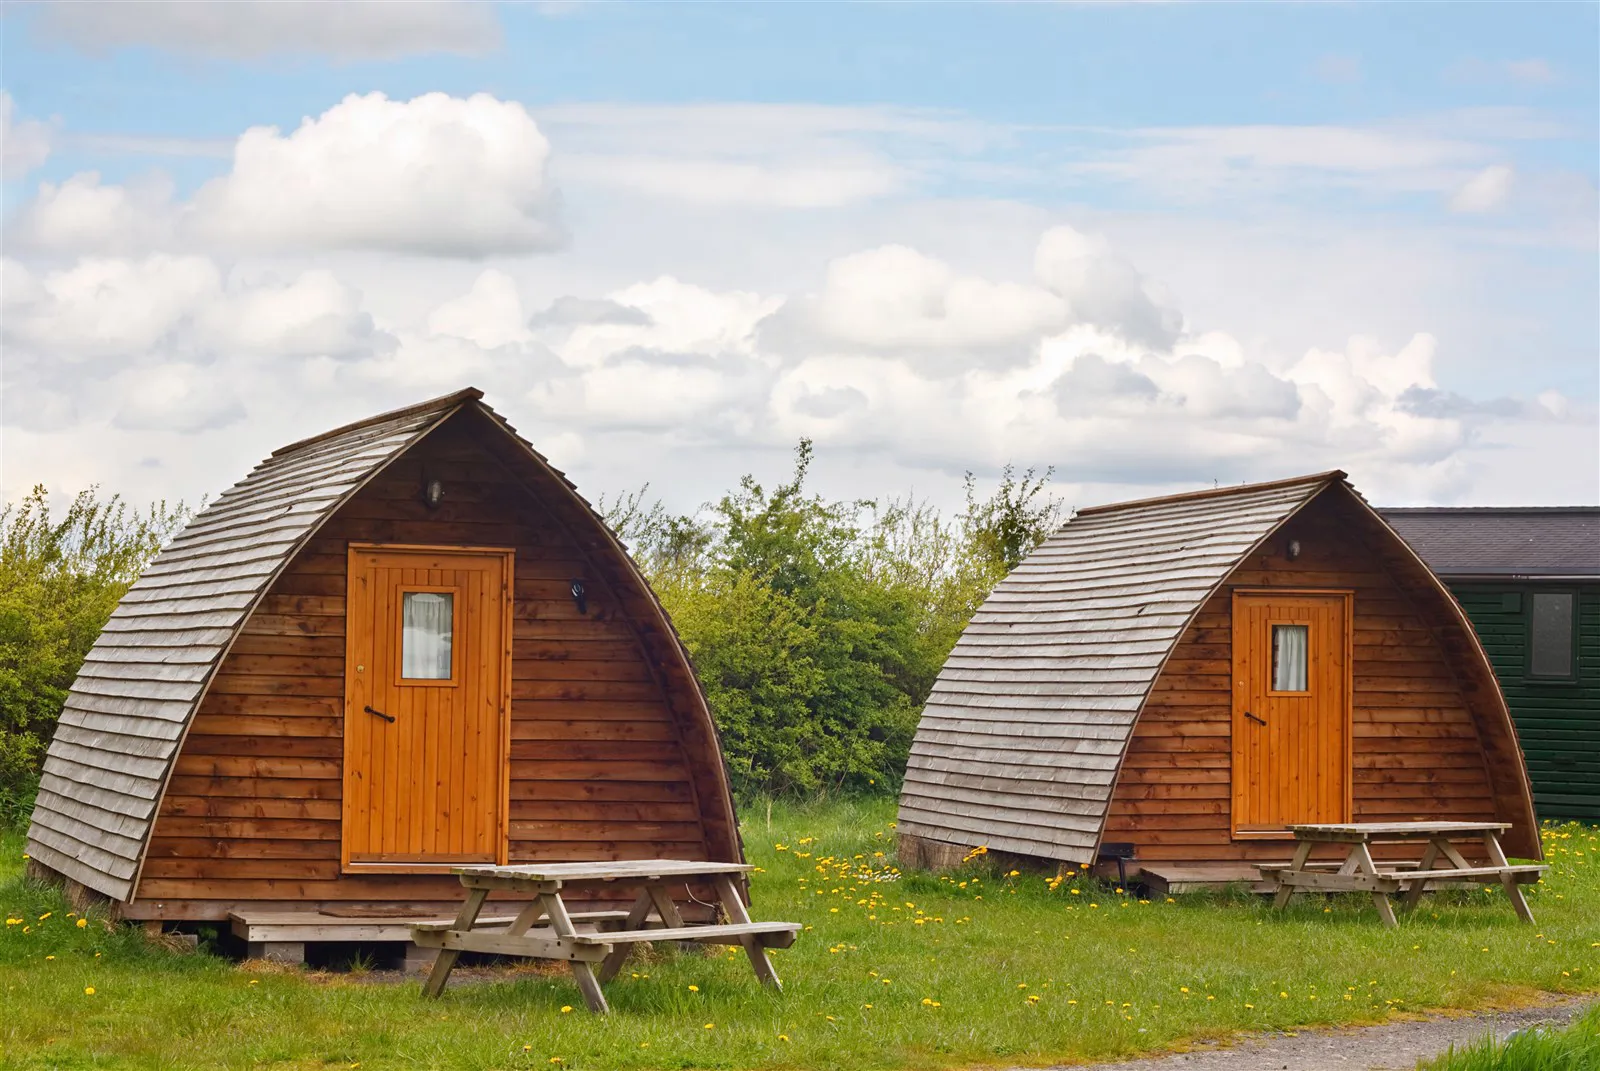 Camping pods in the Yorkshire Dales